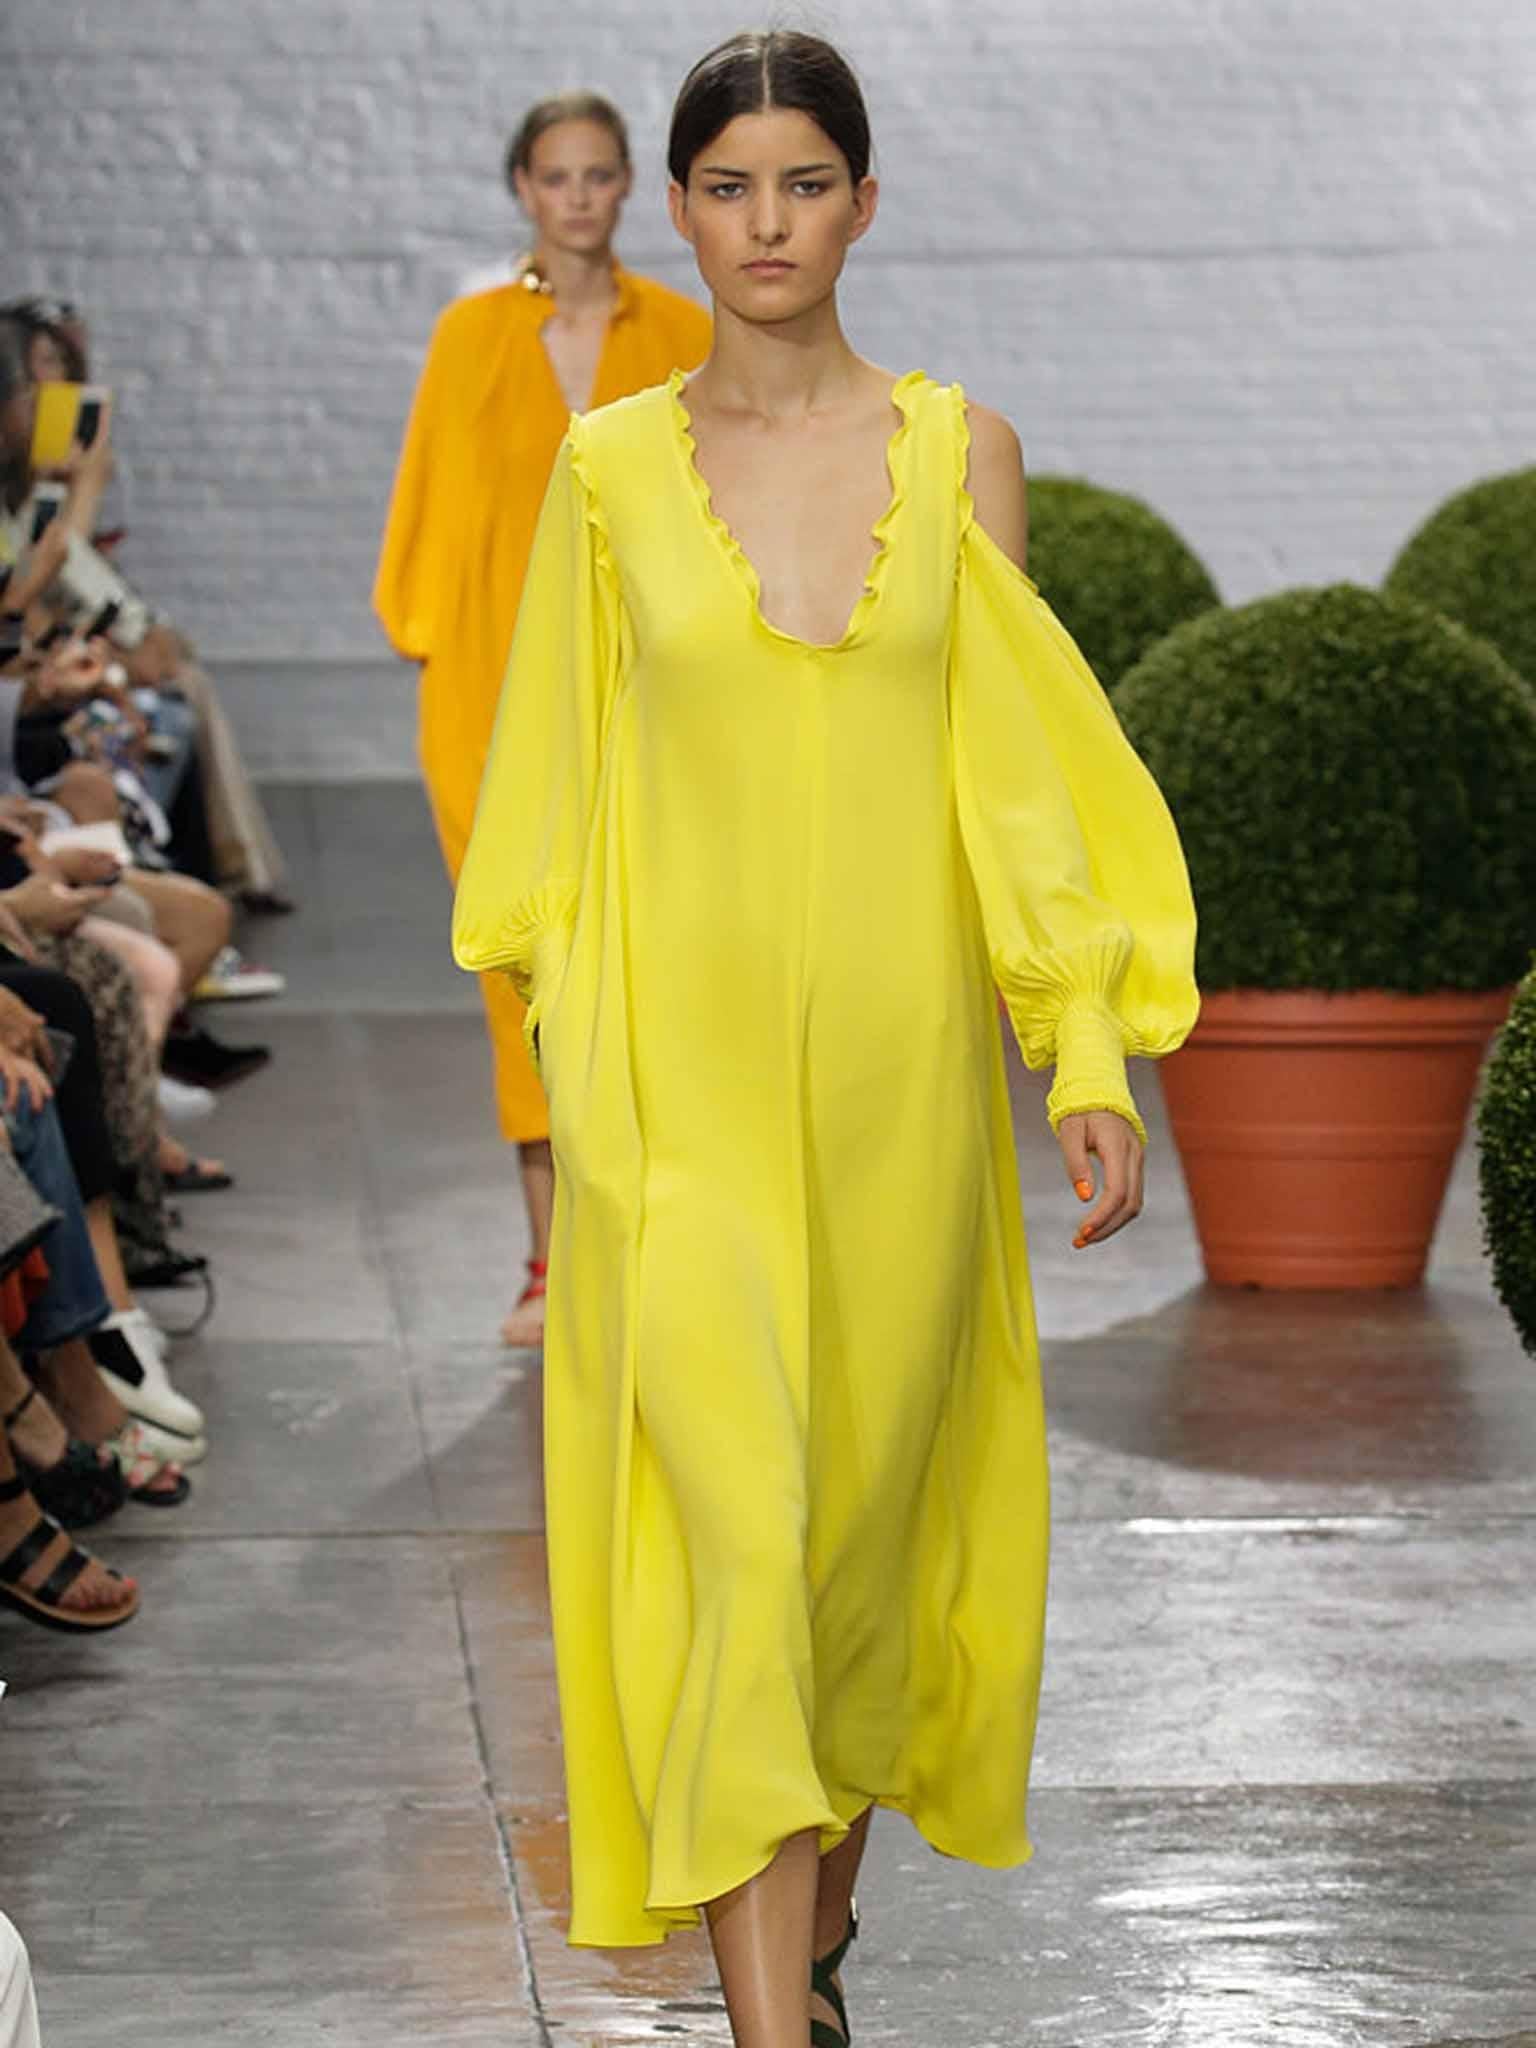 At Tibi shades of primrose yellow offered a dramatic take on colour